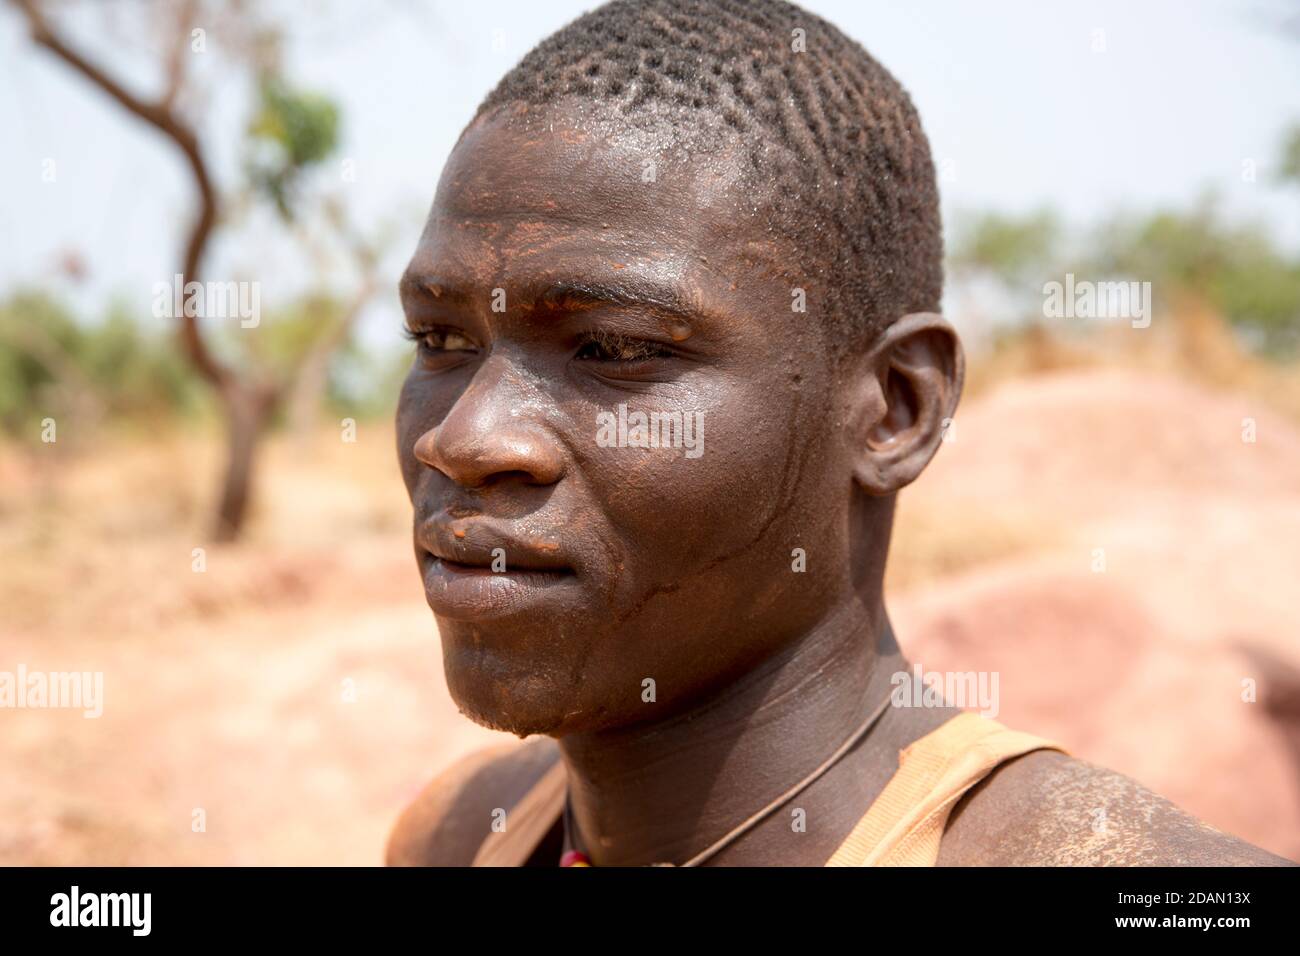 In Pictures: Digging for gold in Mali, Gallery